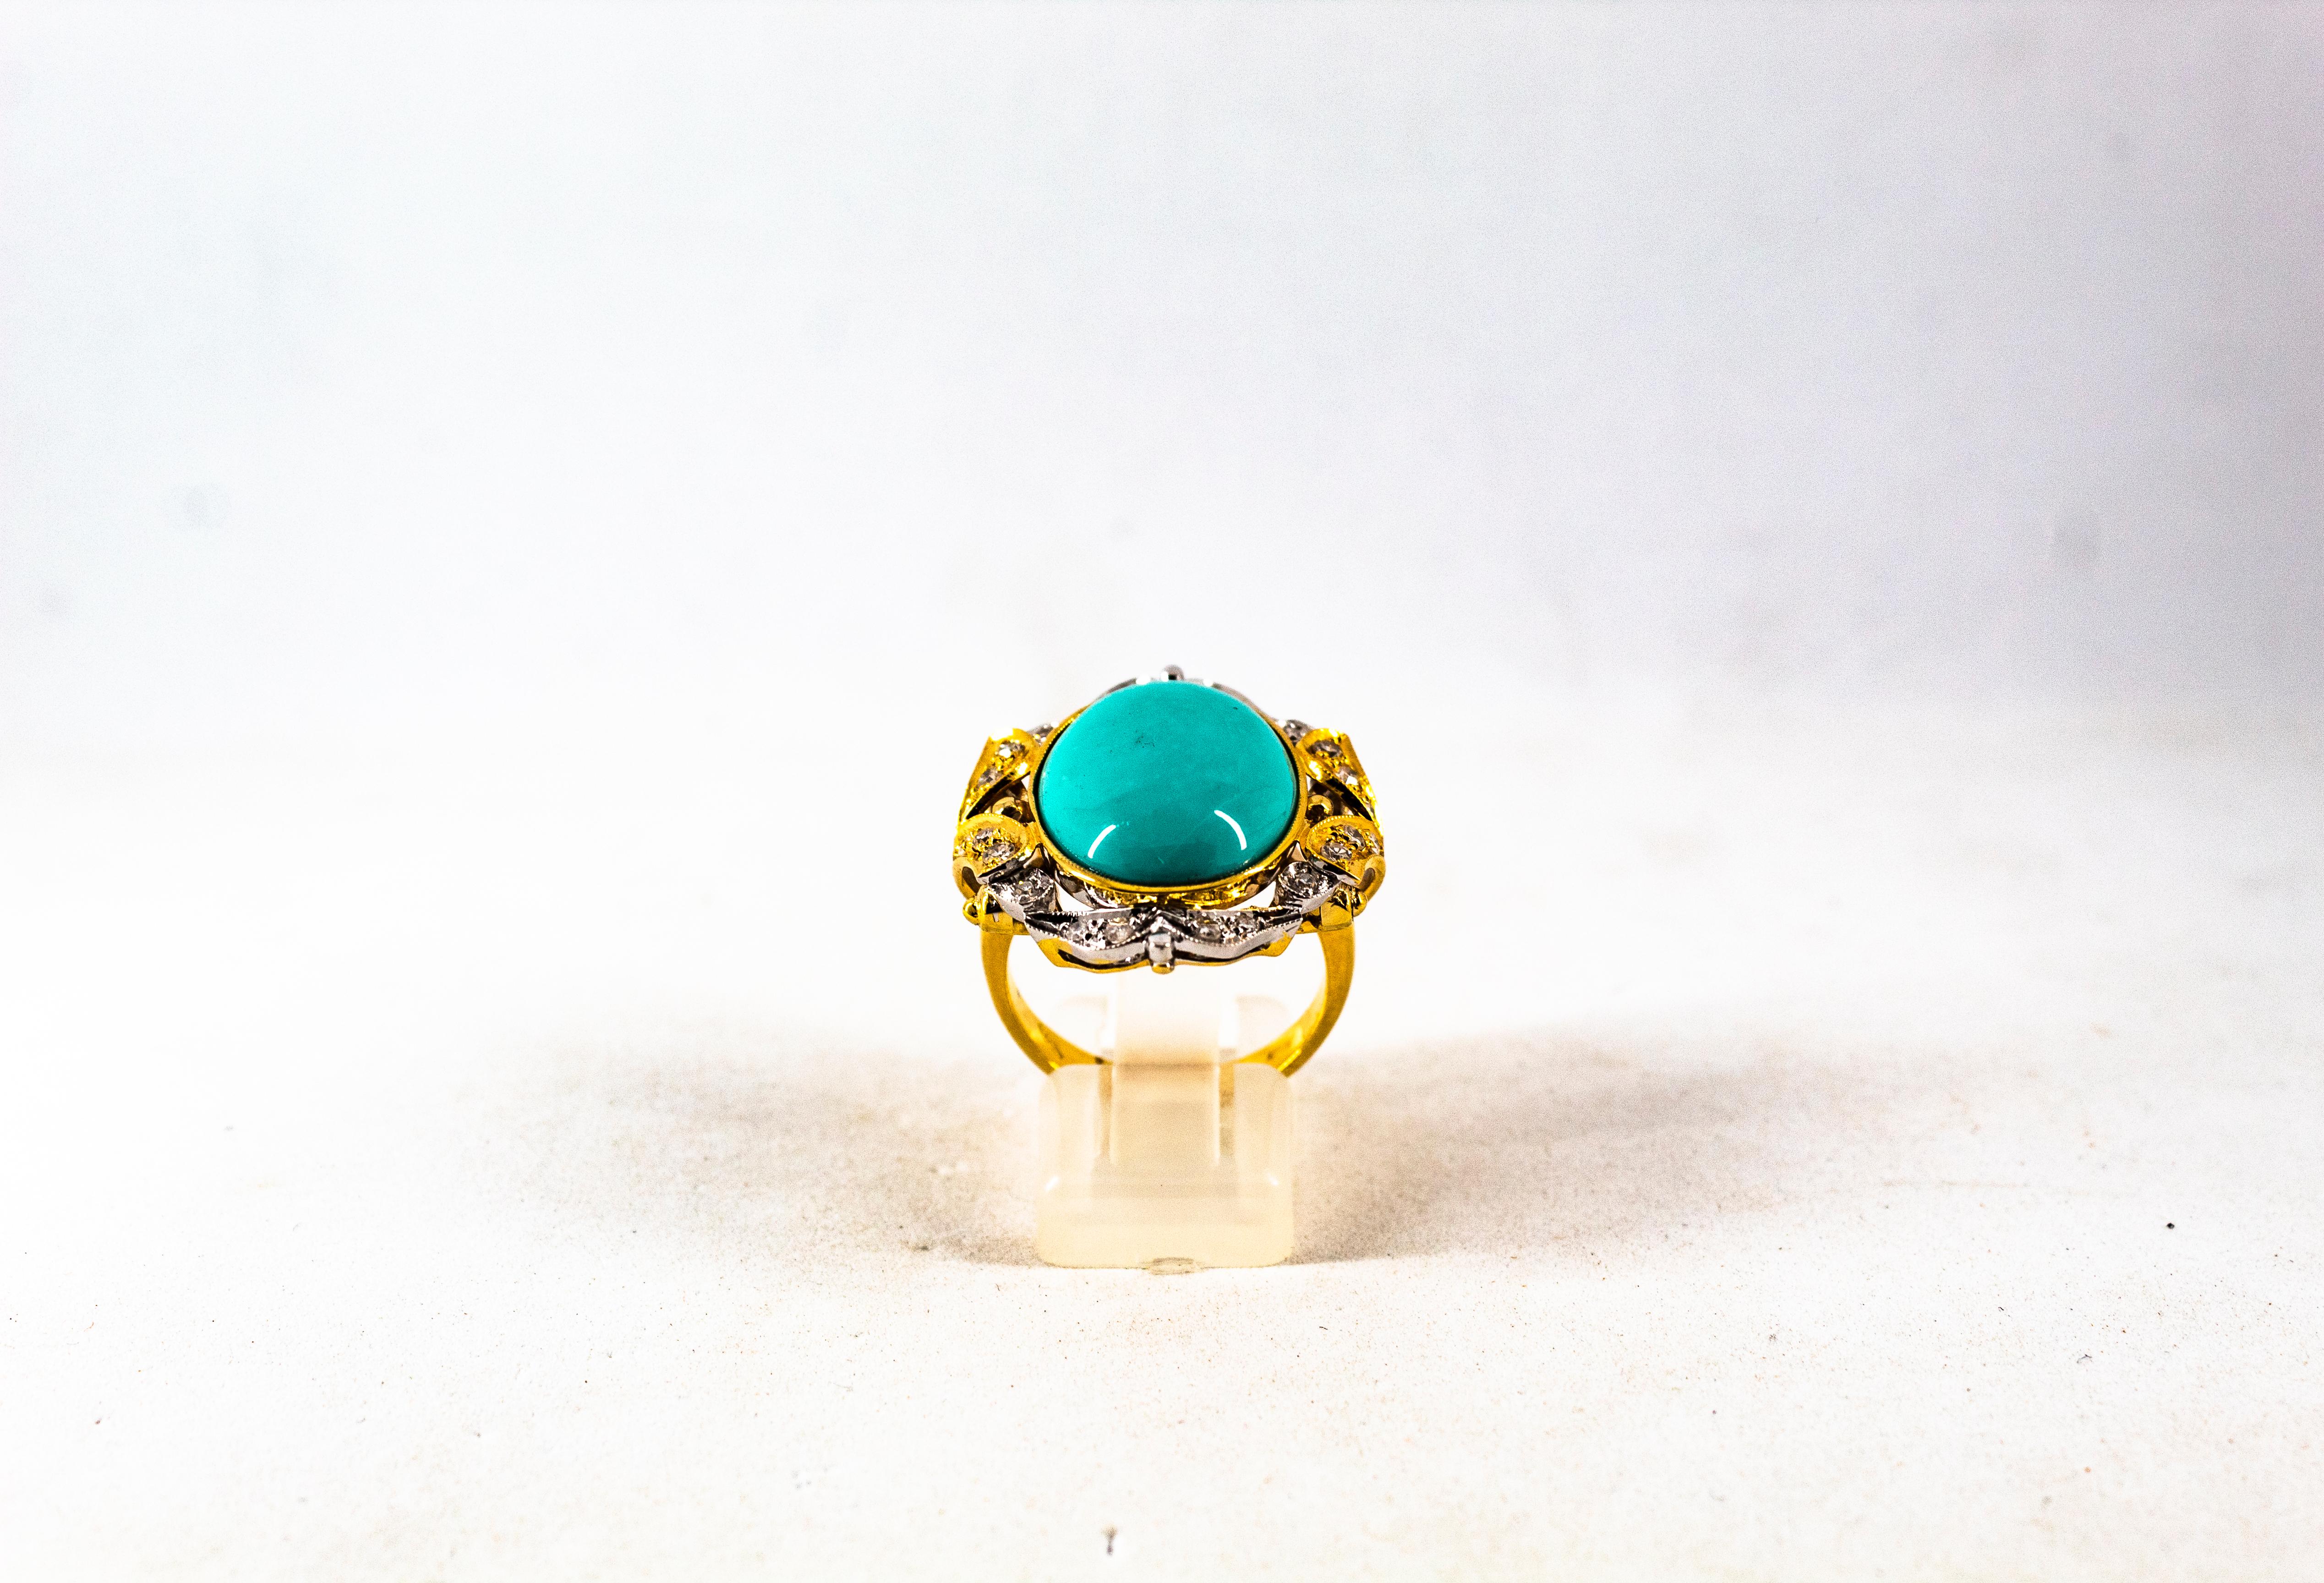 This Ring is made of 14K Yellow Gold.
This Ring has 0.24 Carats of White Modern Round Cut Diamonds.
This Ring has a 10.00 Carats Cabochon Cut Natural Turquoise.
This Ring is available also with a central Pink Coral.
Size ITA: 17 USA: 8
We're a